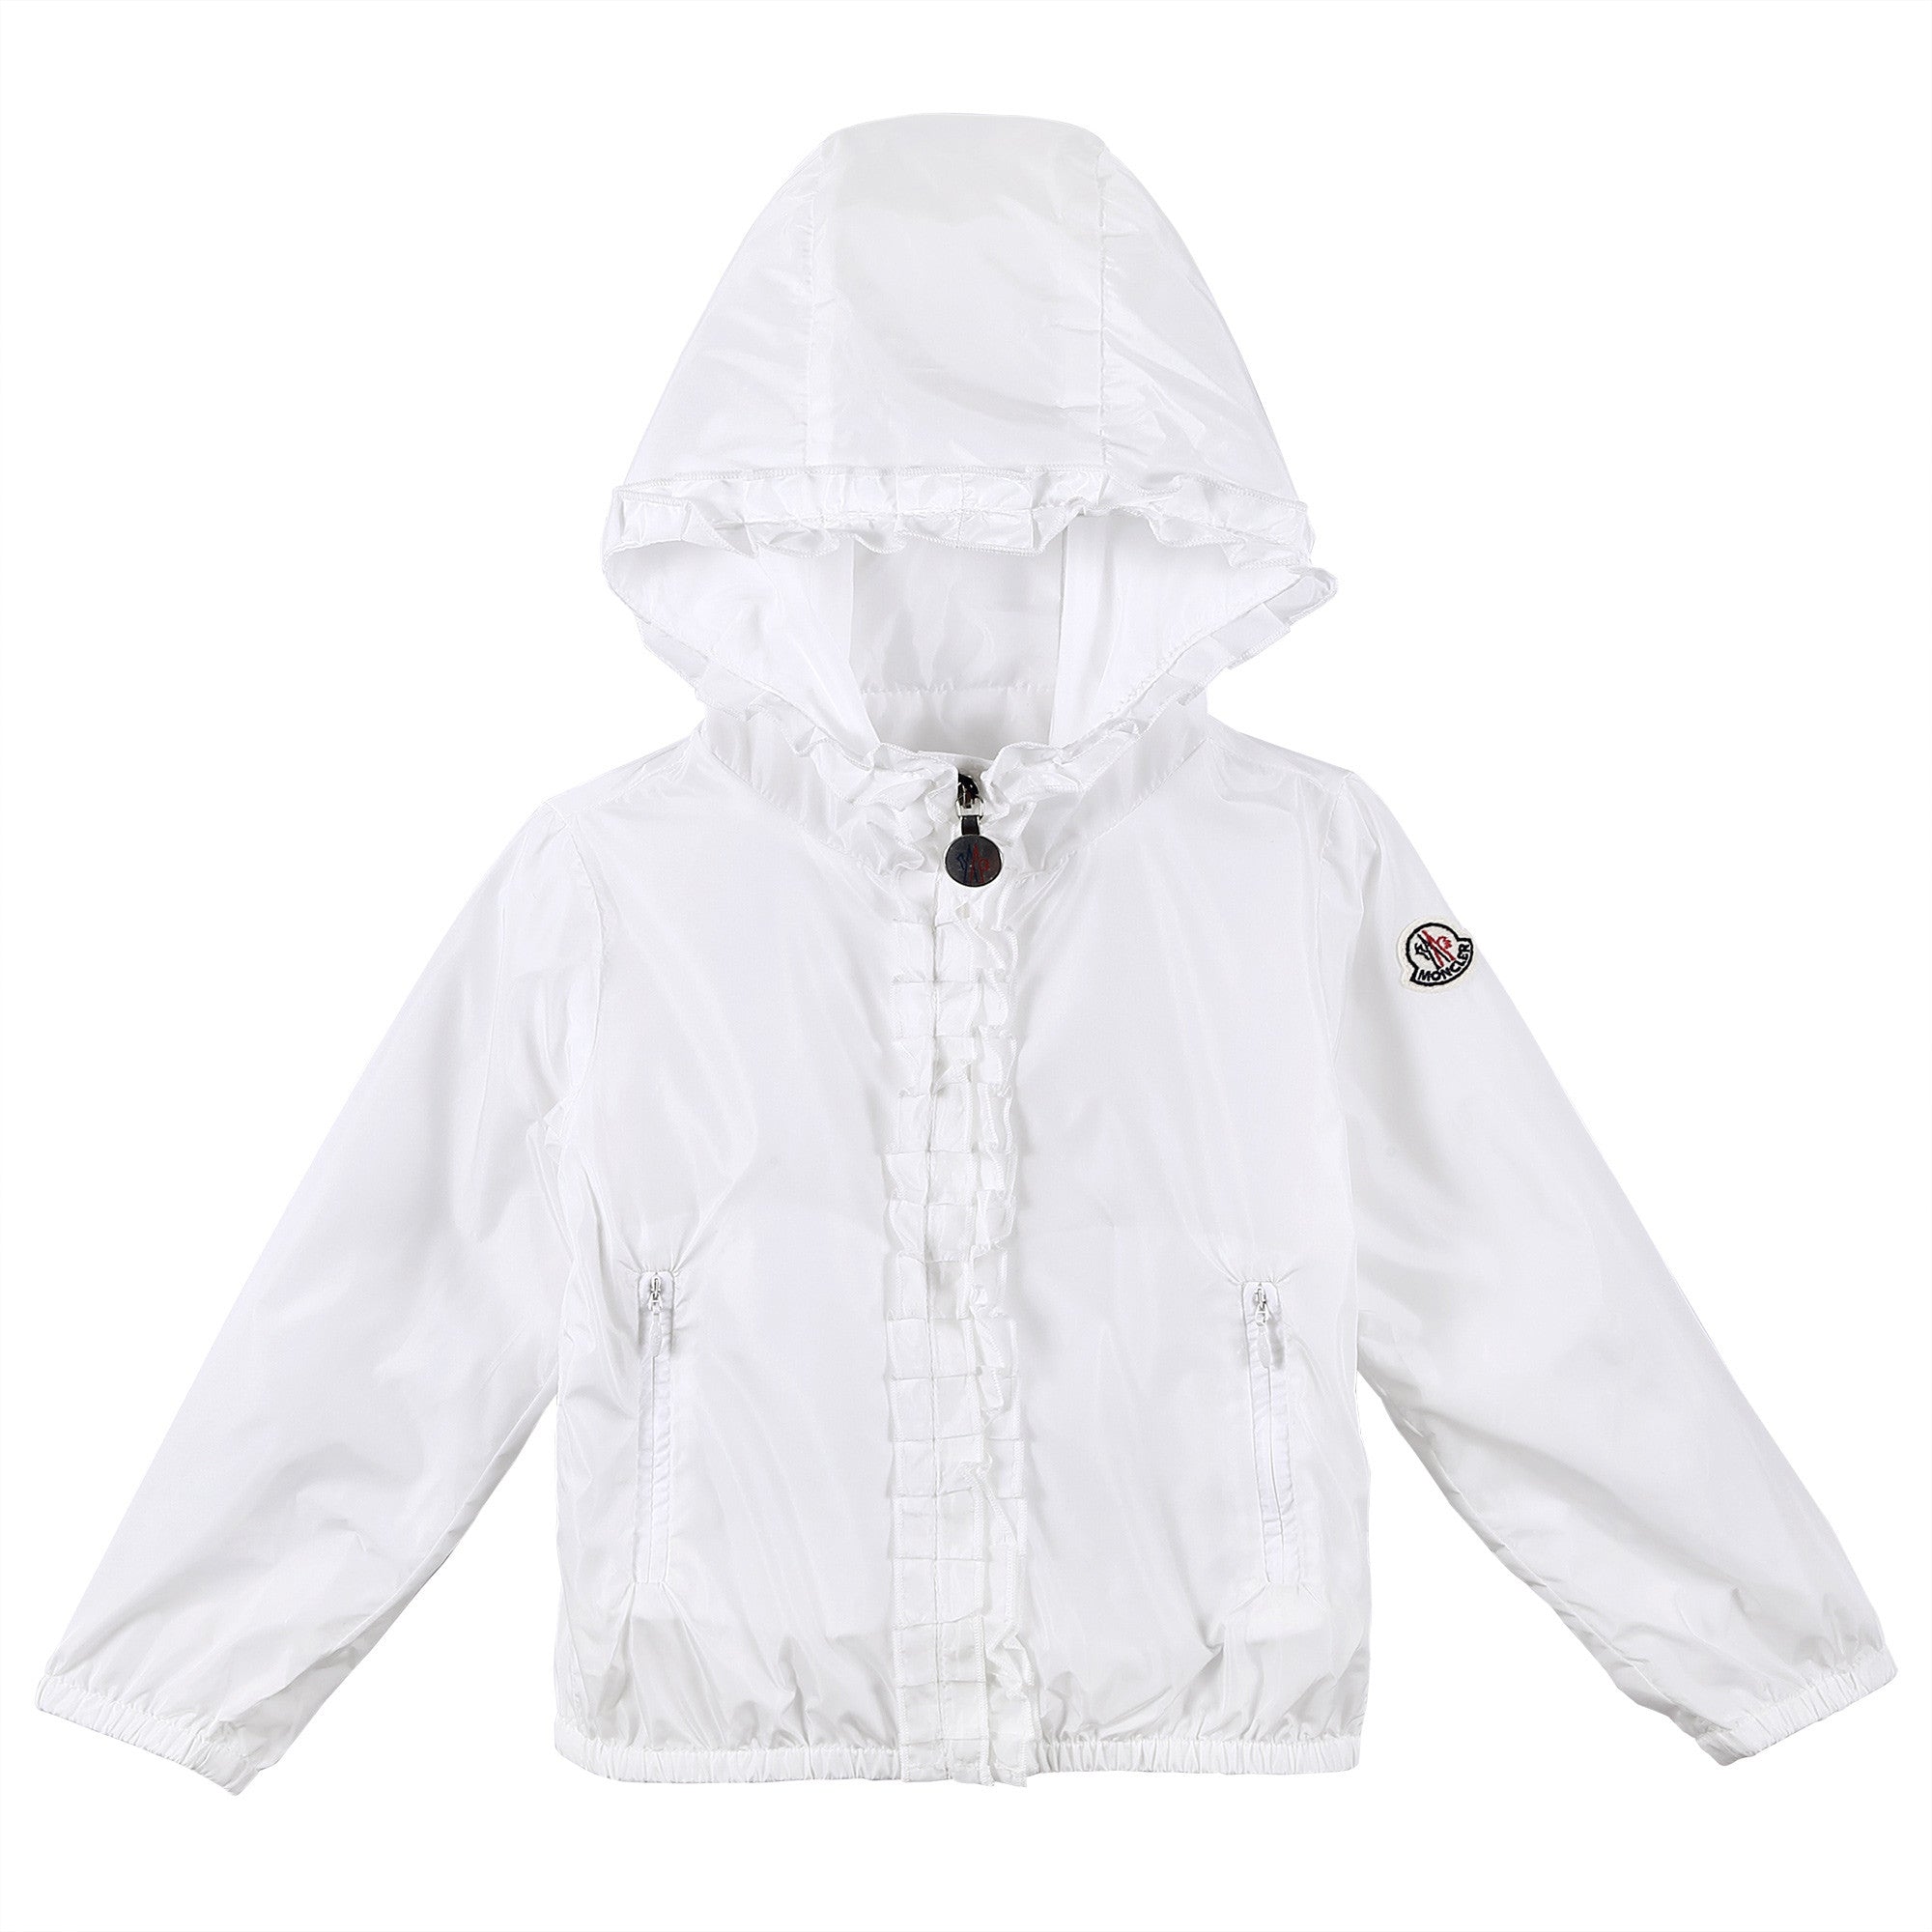 Baby Girls White Frilly Hooded 'Darma' Zip-Up Tops - CÉMAROSE | Children's Fashion Store - 1